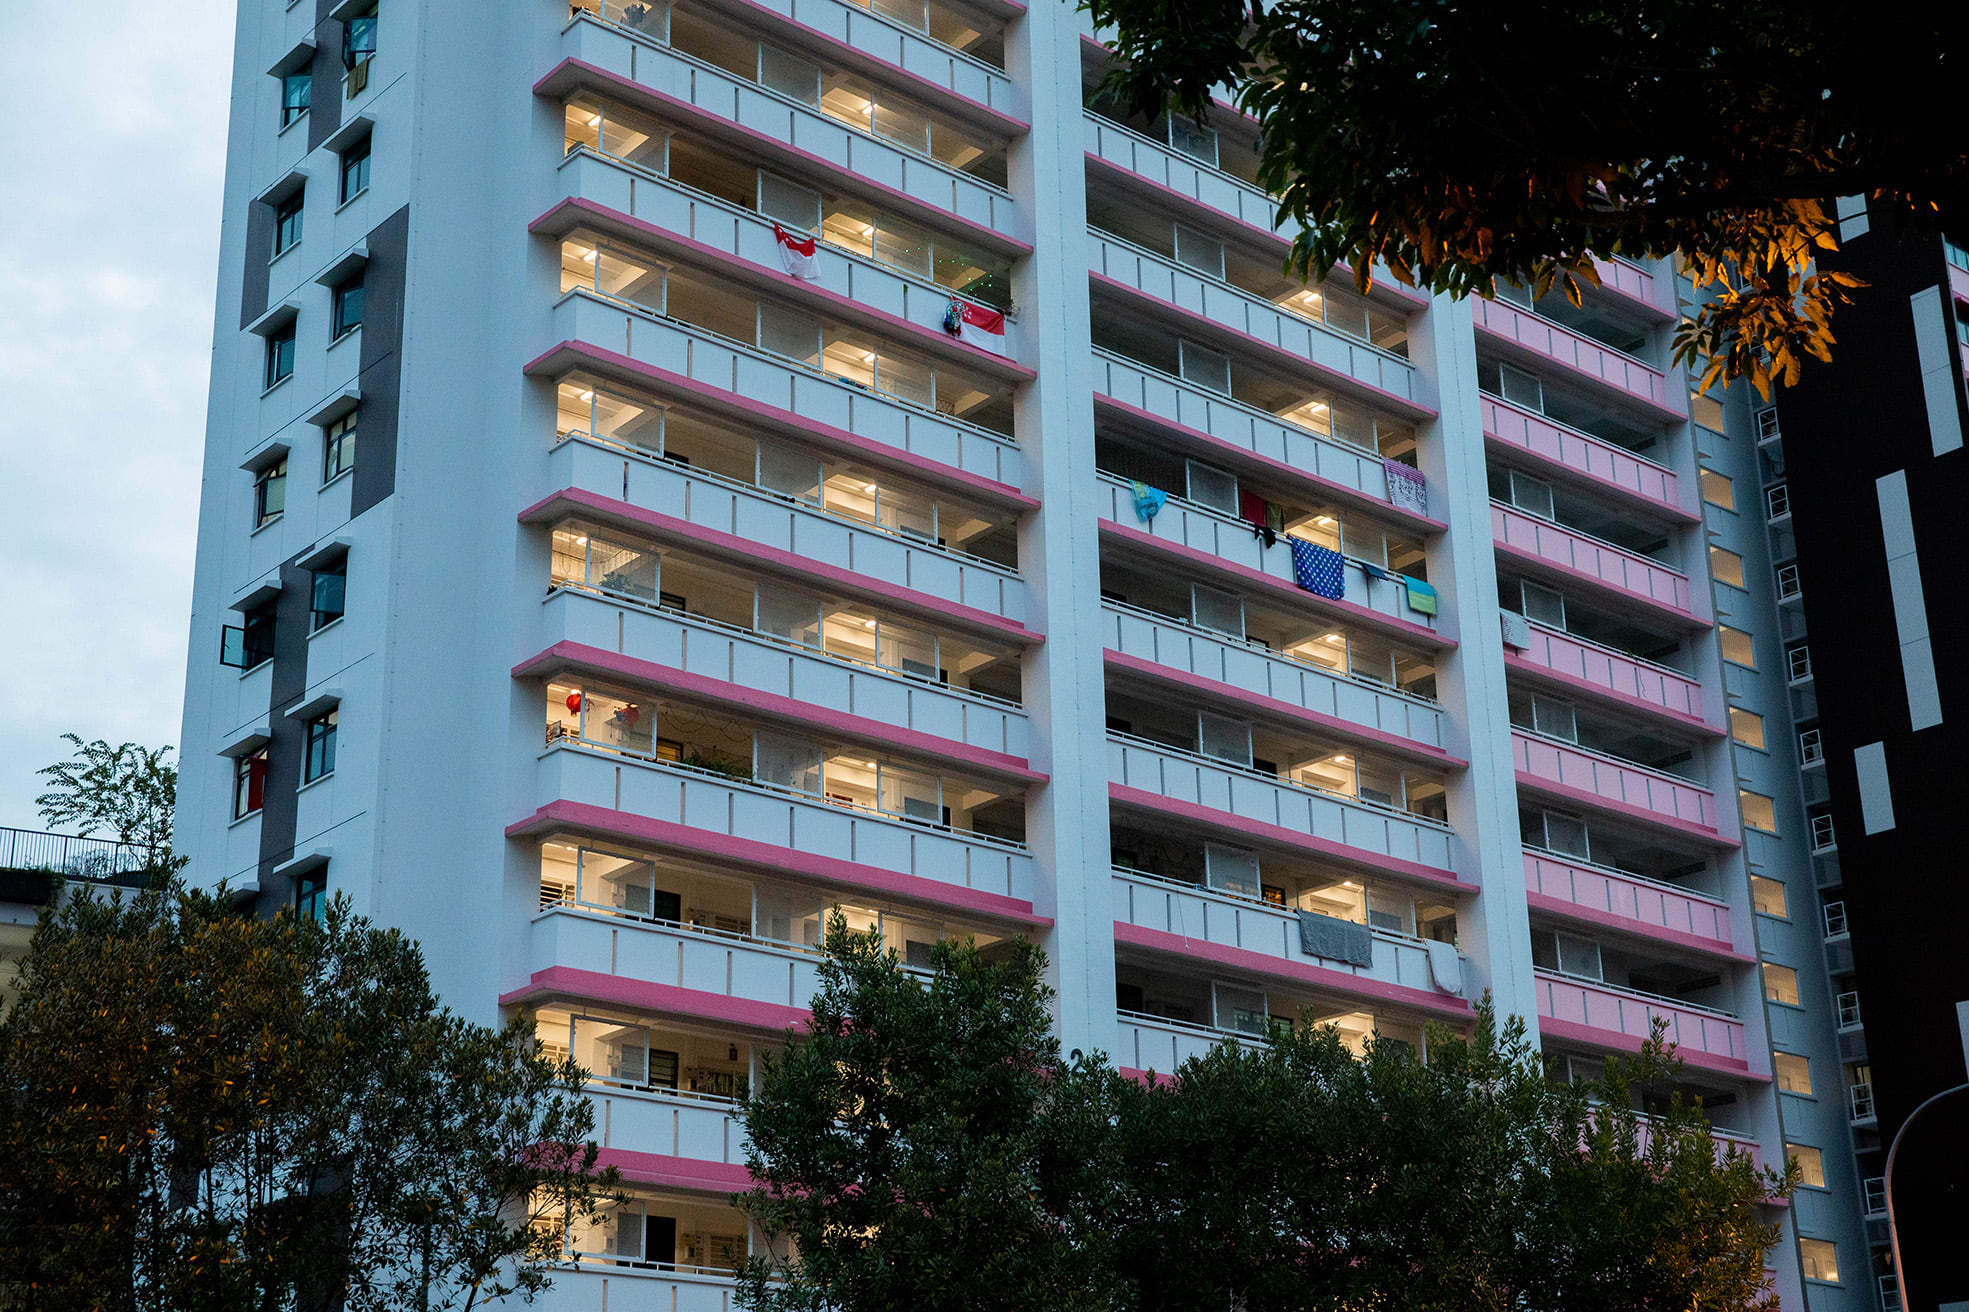 About 4,500 households — close to 9 per cent of the total rental households in Singapore — living in public rental flats bought their own homes from 2017 to 2021.